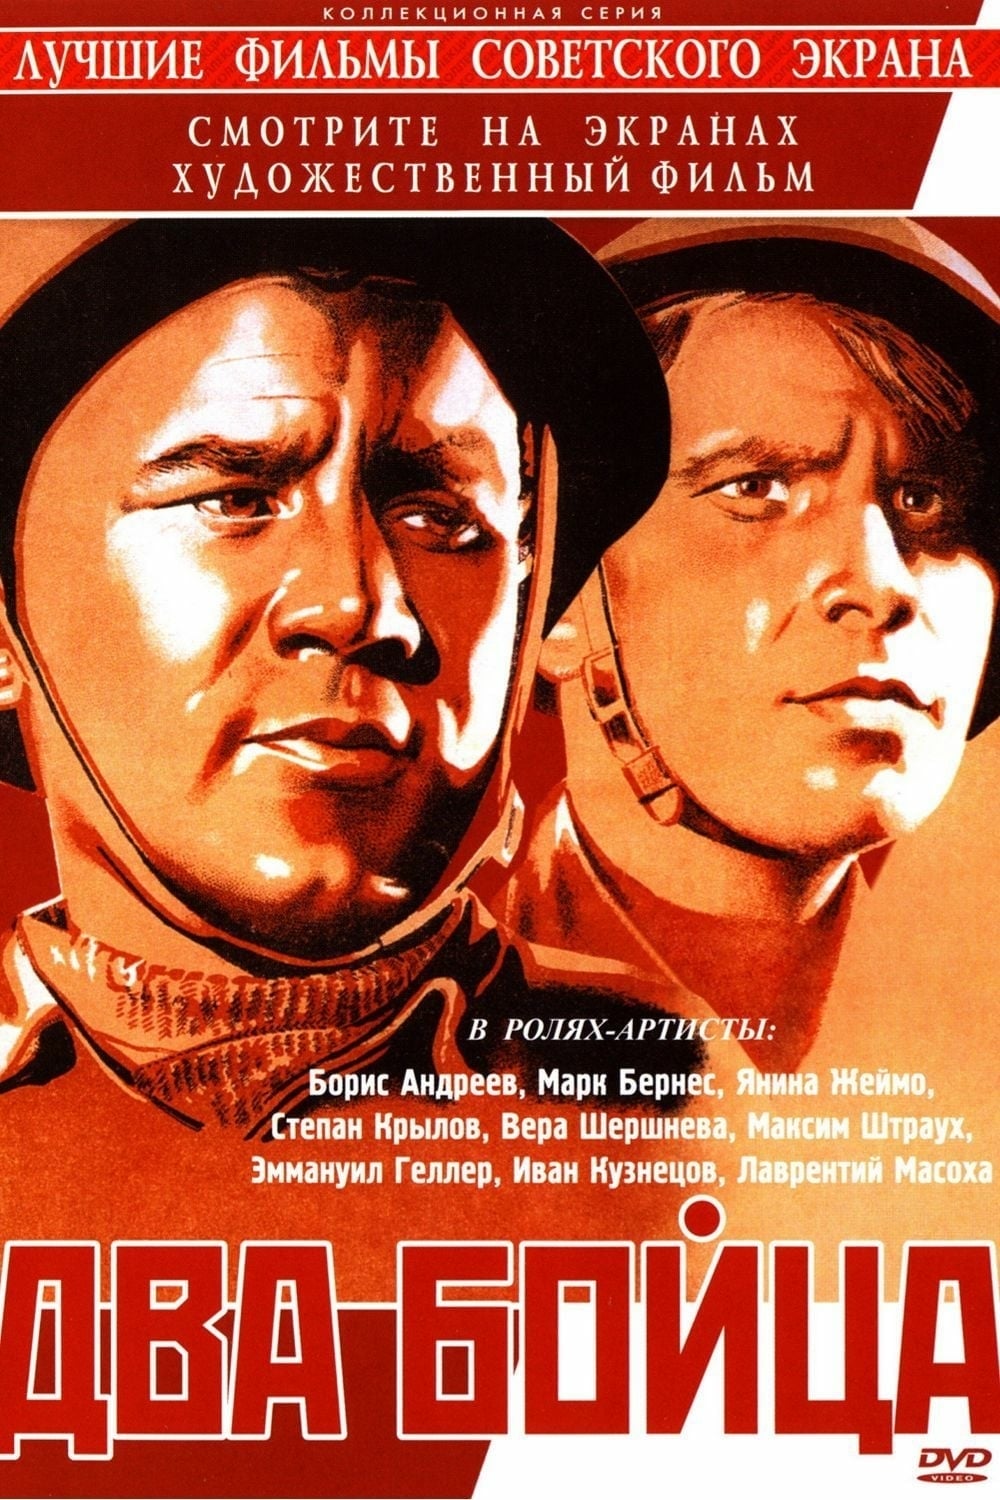 Two Soldiers (1943)